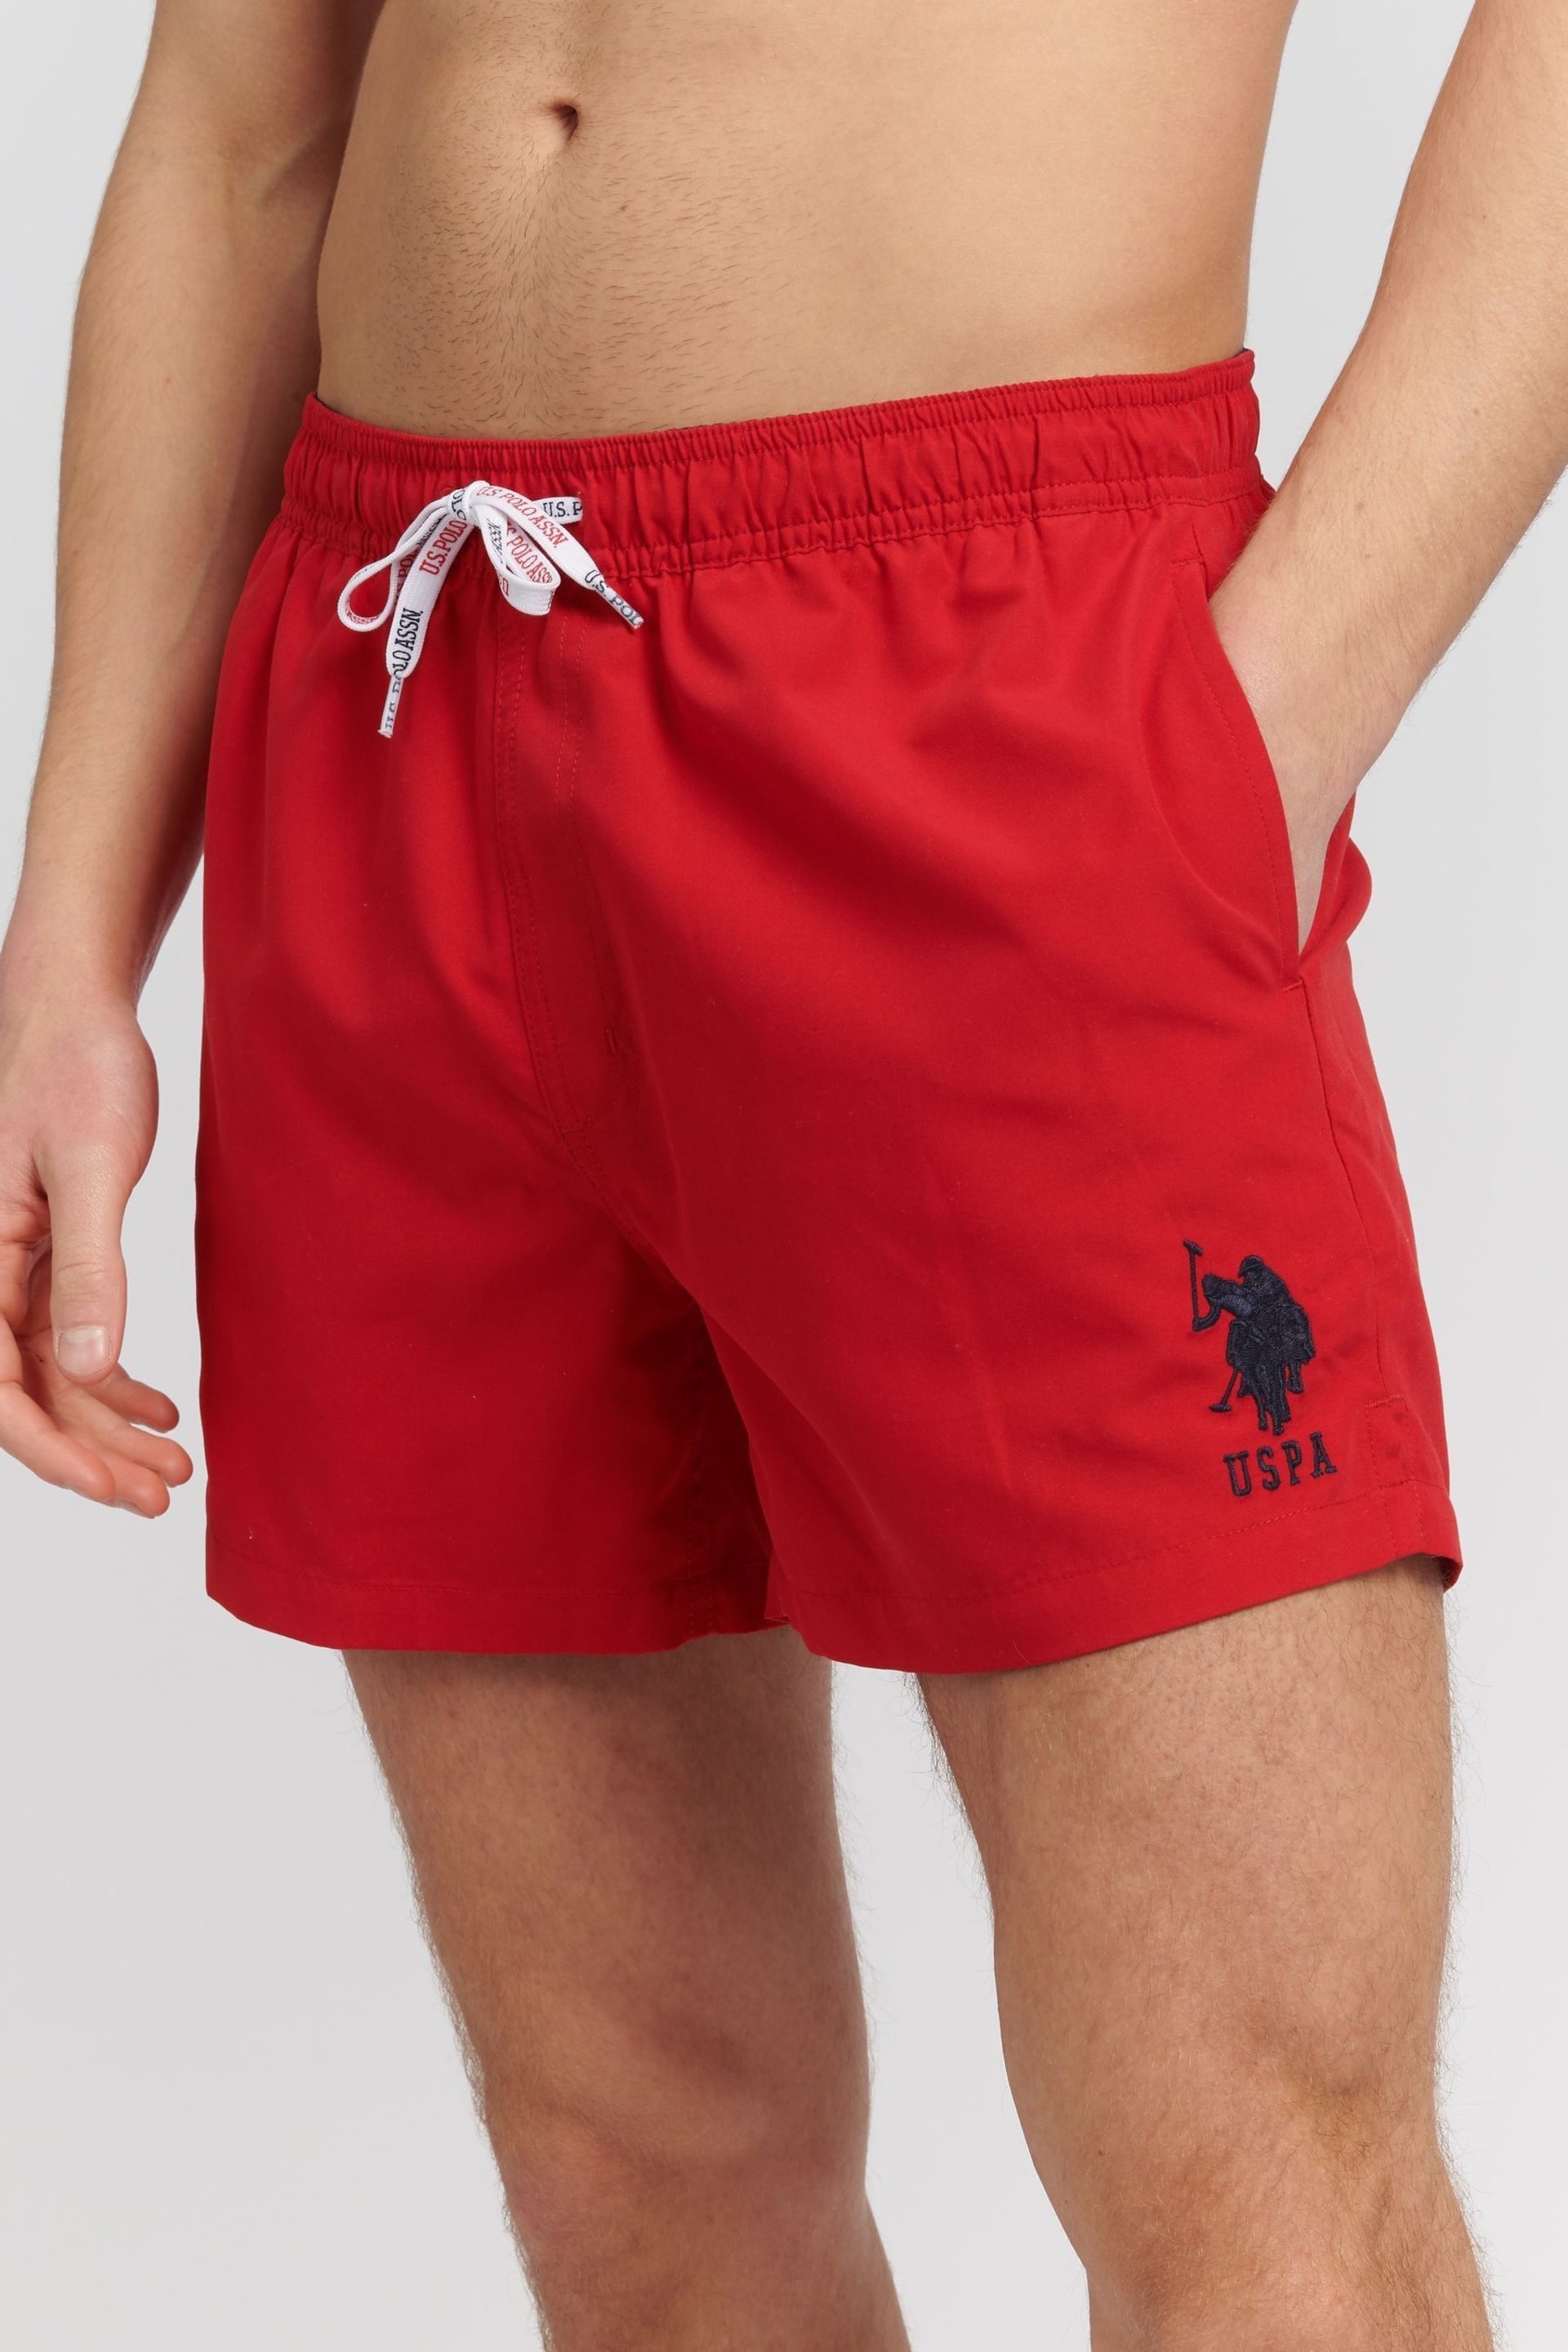 U.S. Polo Assn. Mens Red Player 3 Swim Shorts - Image 1 of 5